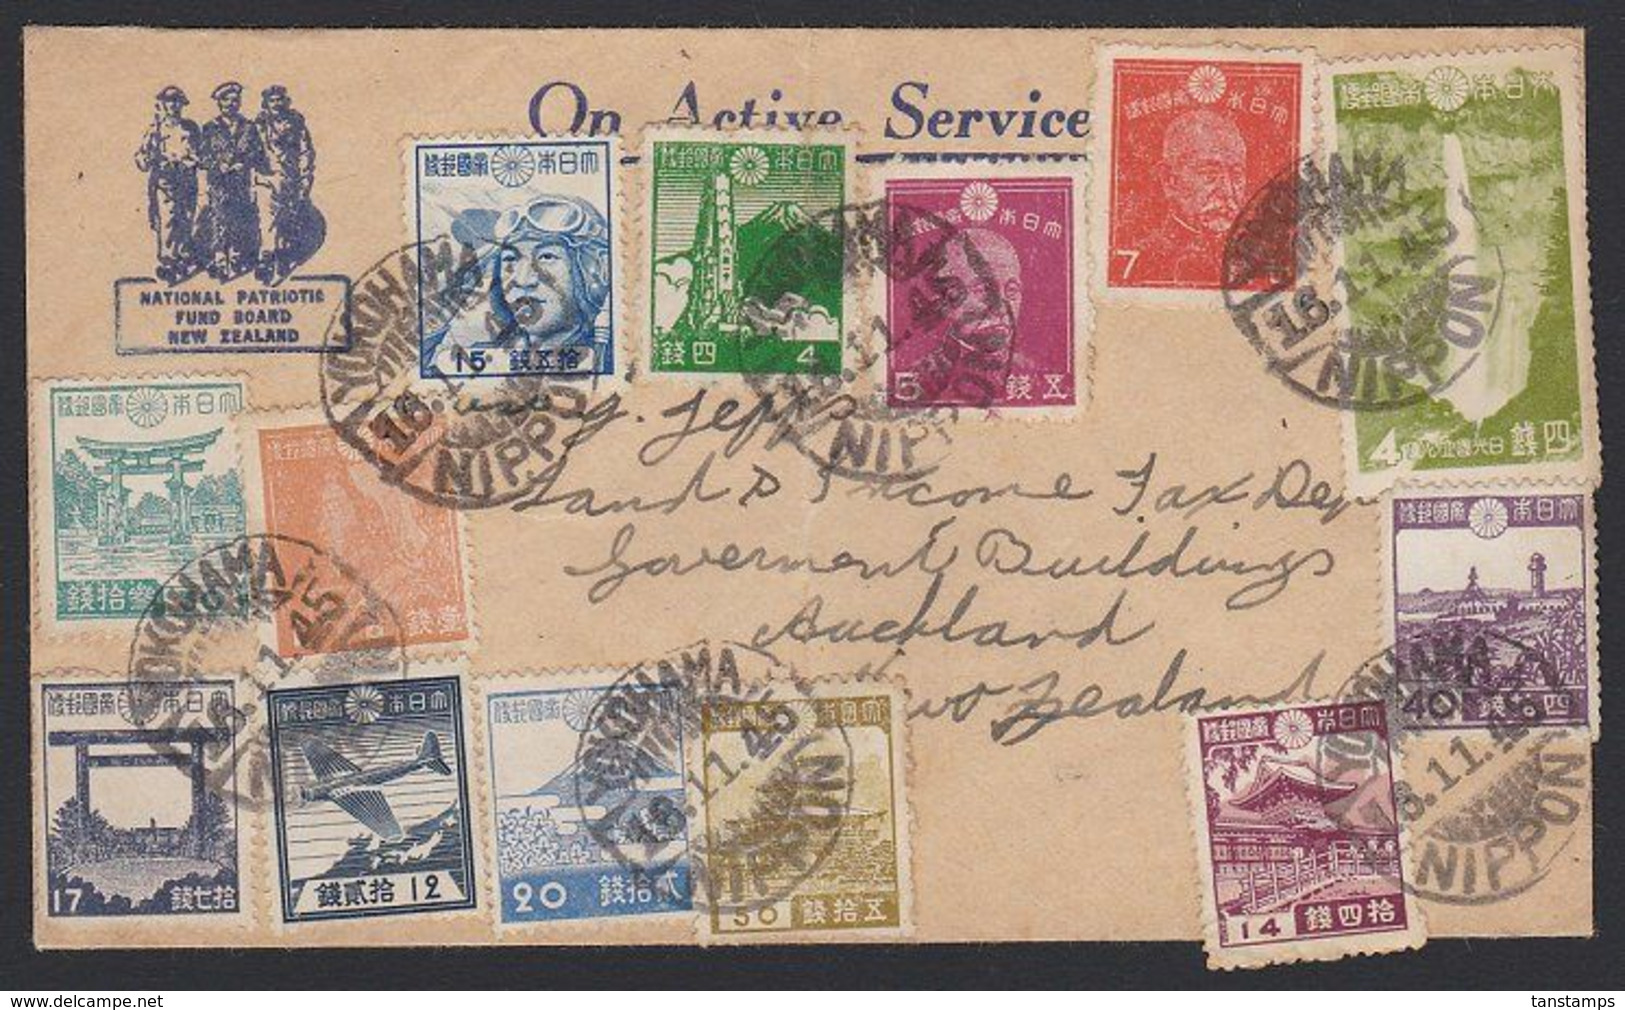 JAPAN - NZ MULTI-FRANKED ON ACTIVE SERVICE COVER 1945 - Covers & Documents